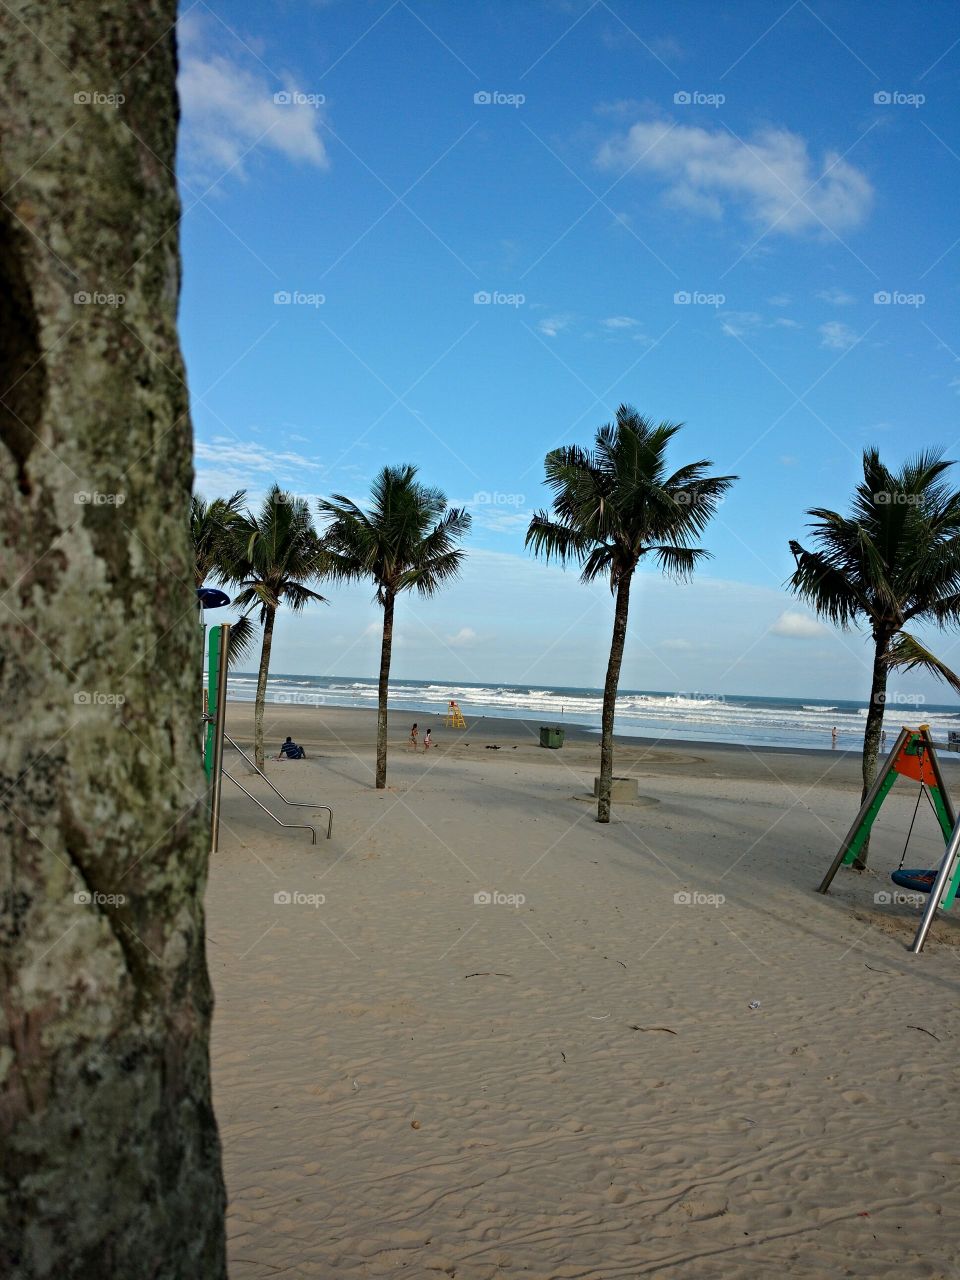 The tree sees the coconut trees